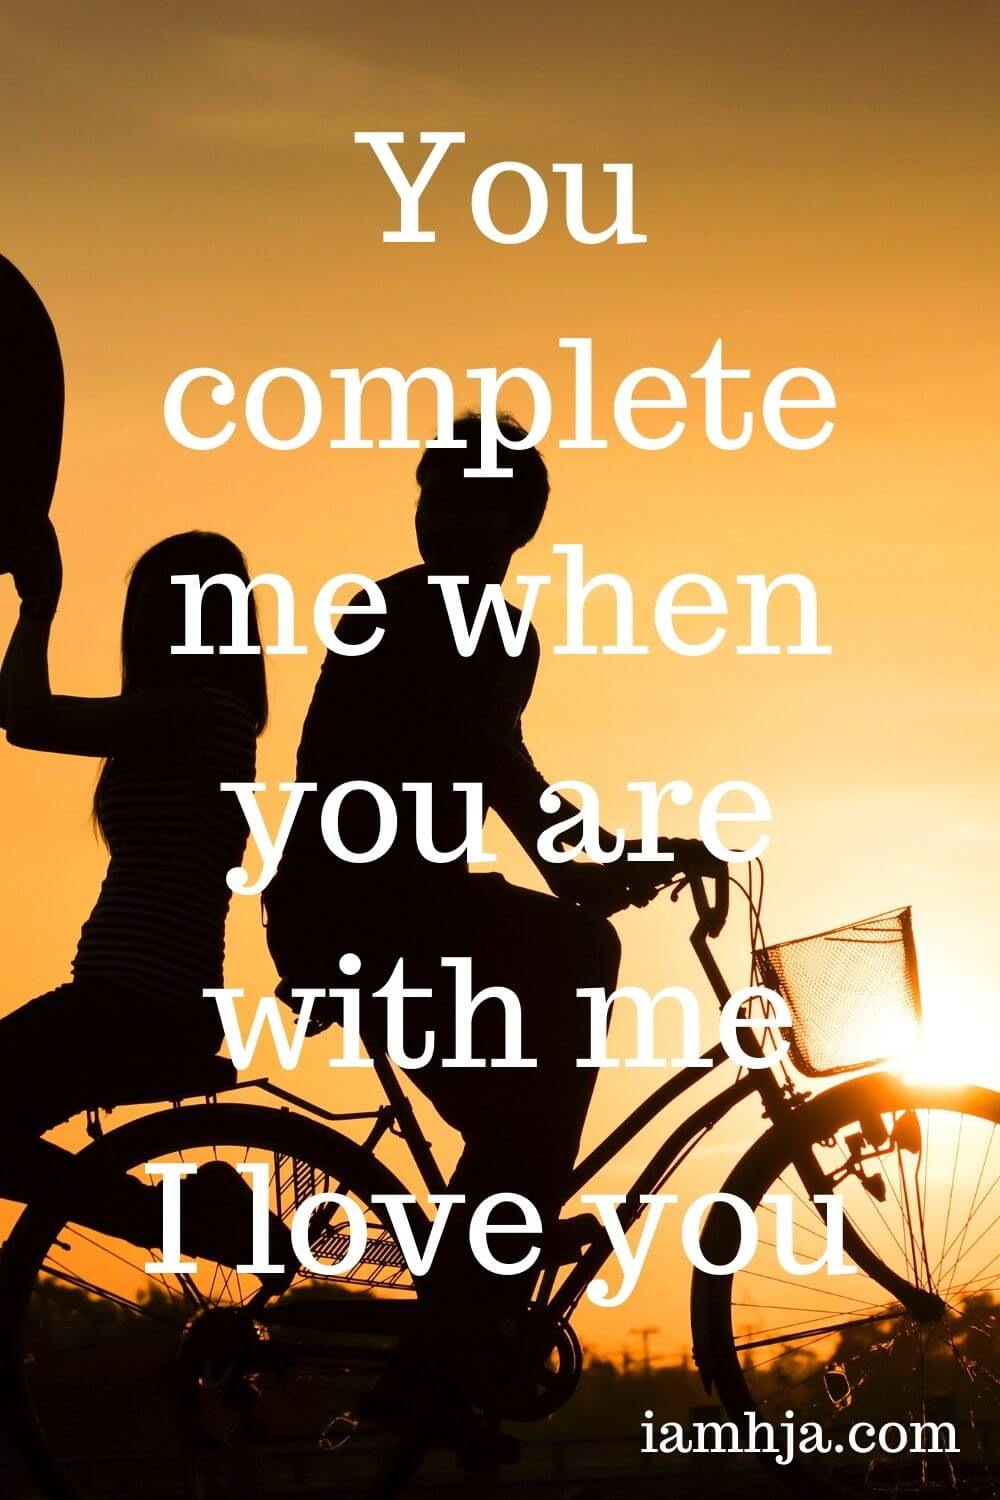 You complete me when you are with me. I love you